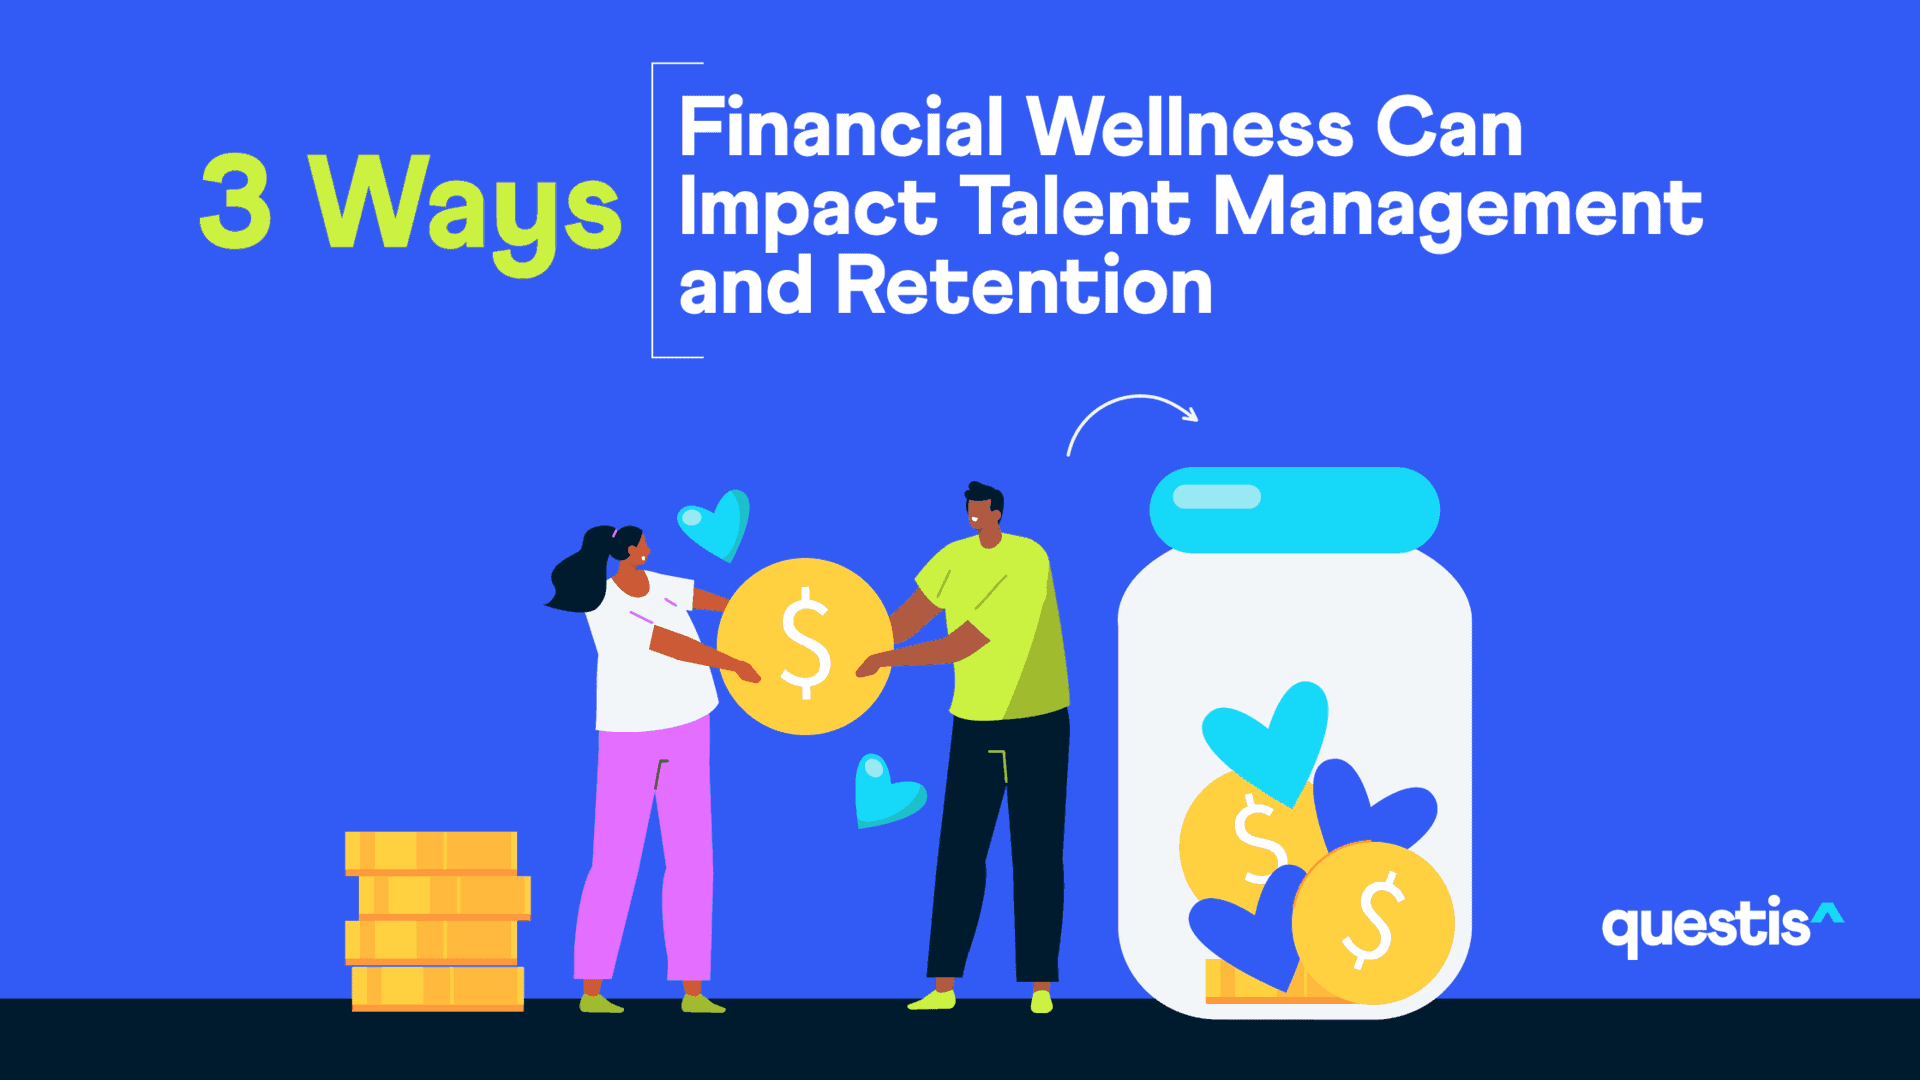 3 Ways Financial Wellness Can Impact Talent Management and Retention